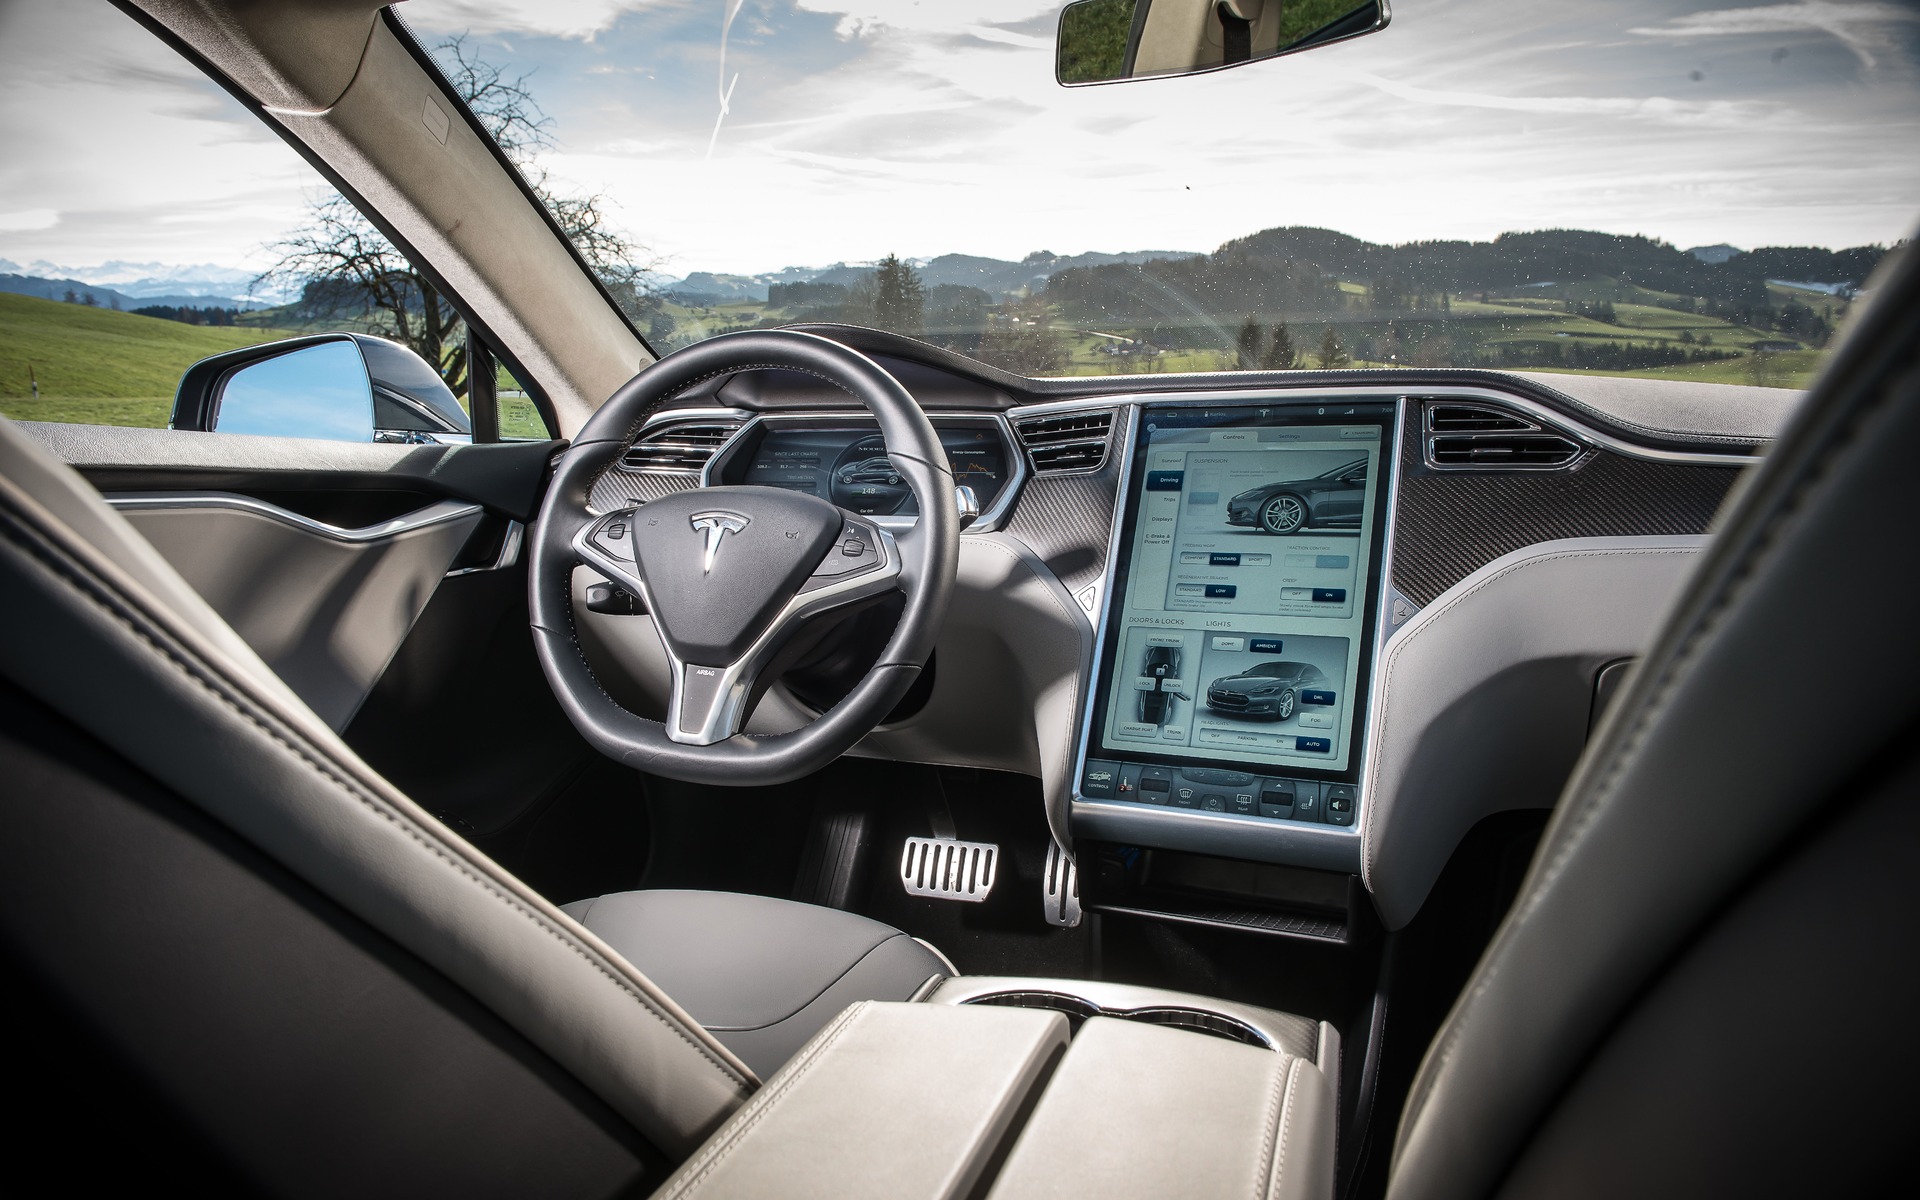 tack Compliment genie 2018 Tesla Model S photos - 2/3 - The Car Guide